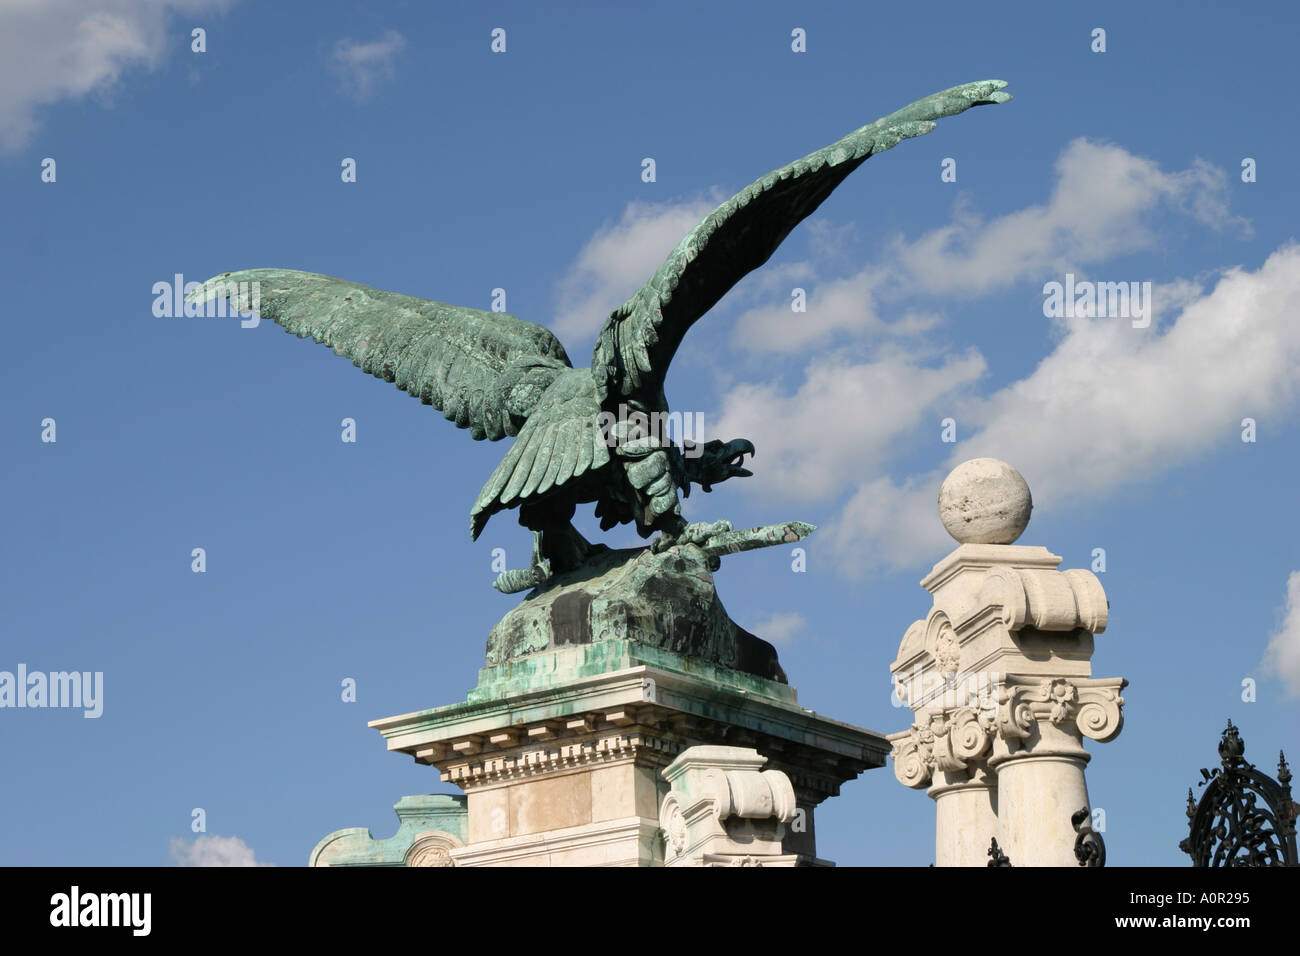 The Turul bird on the Ornamental gateway from the Habsburg steps to the Royal Palace in Budapest Hungary Stock Photo